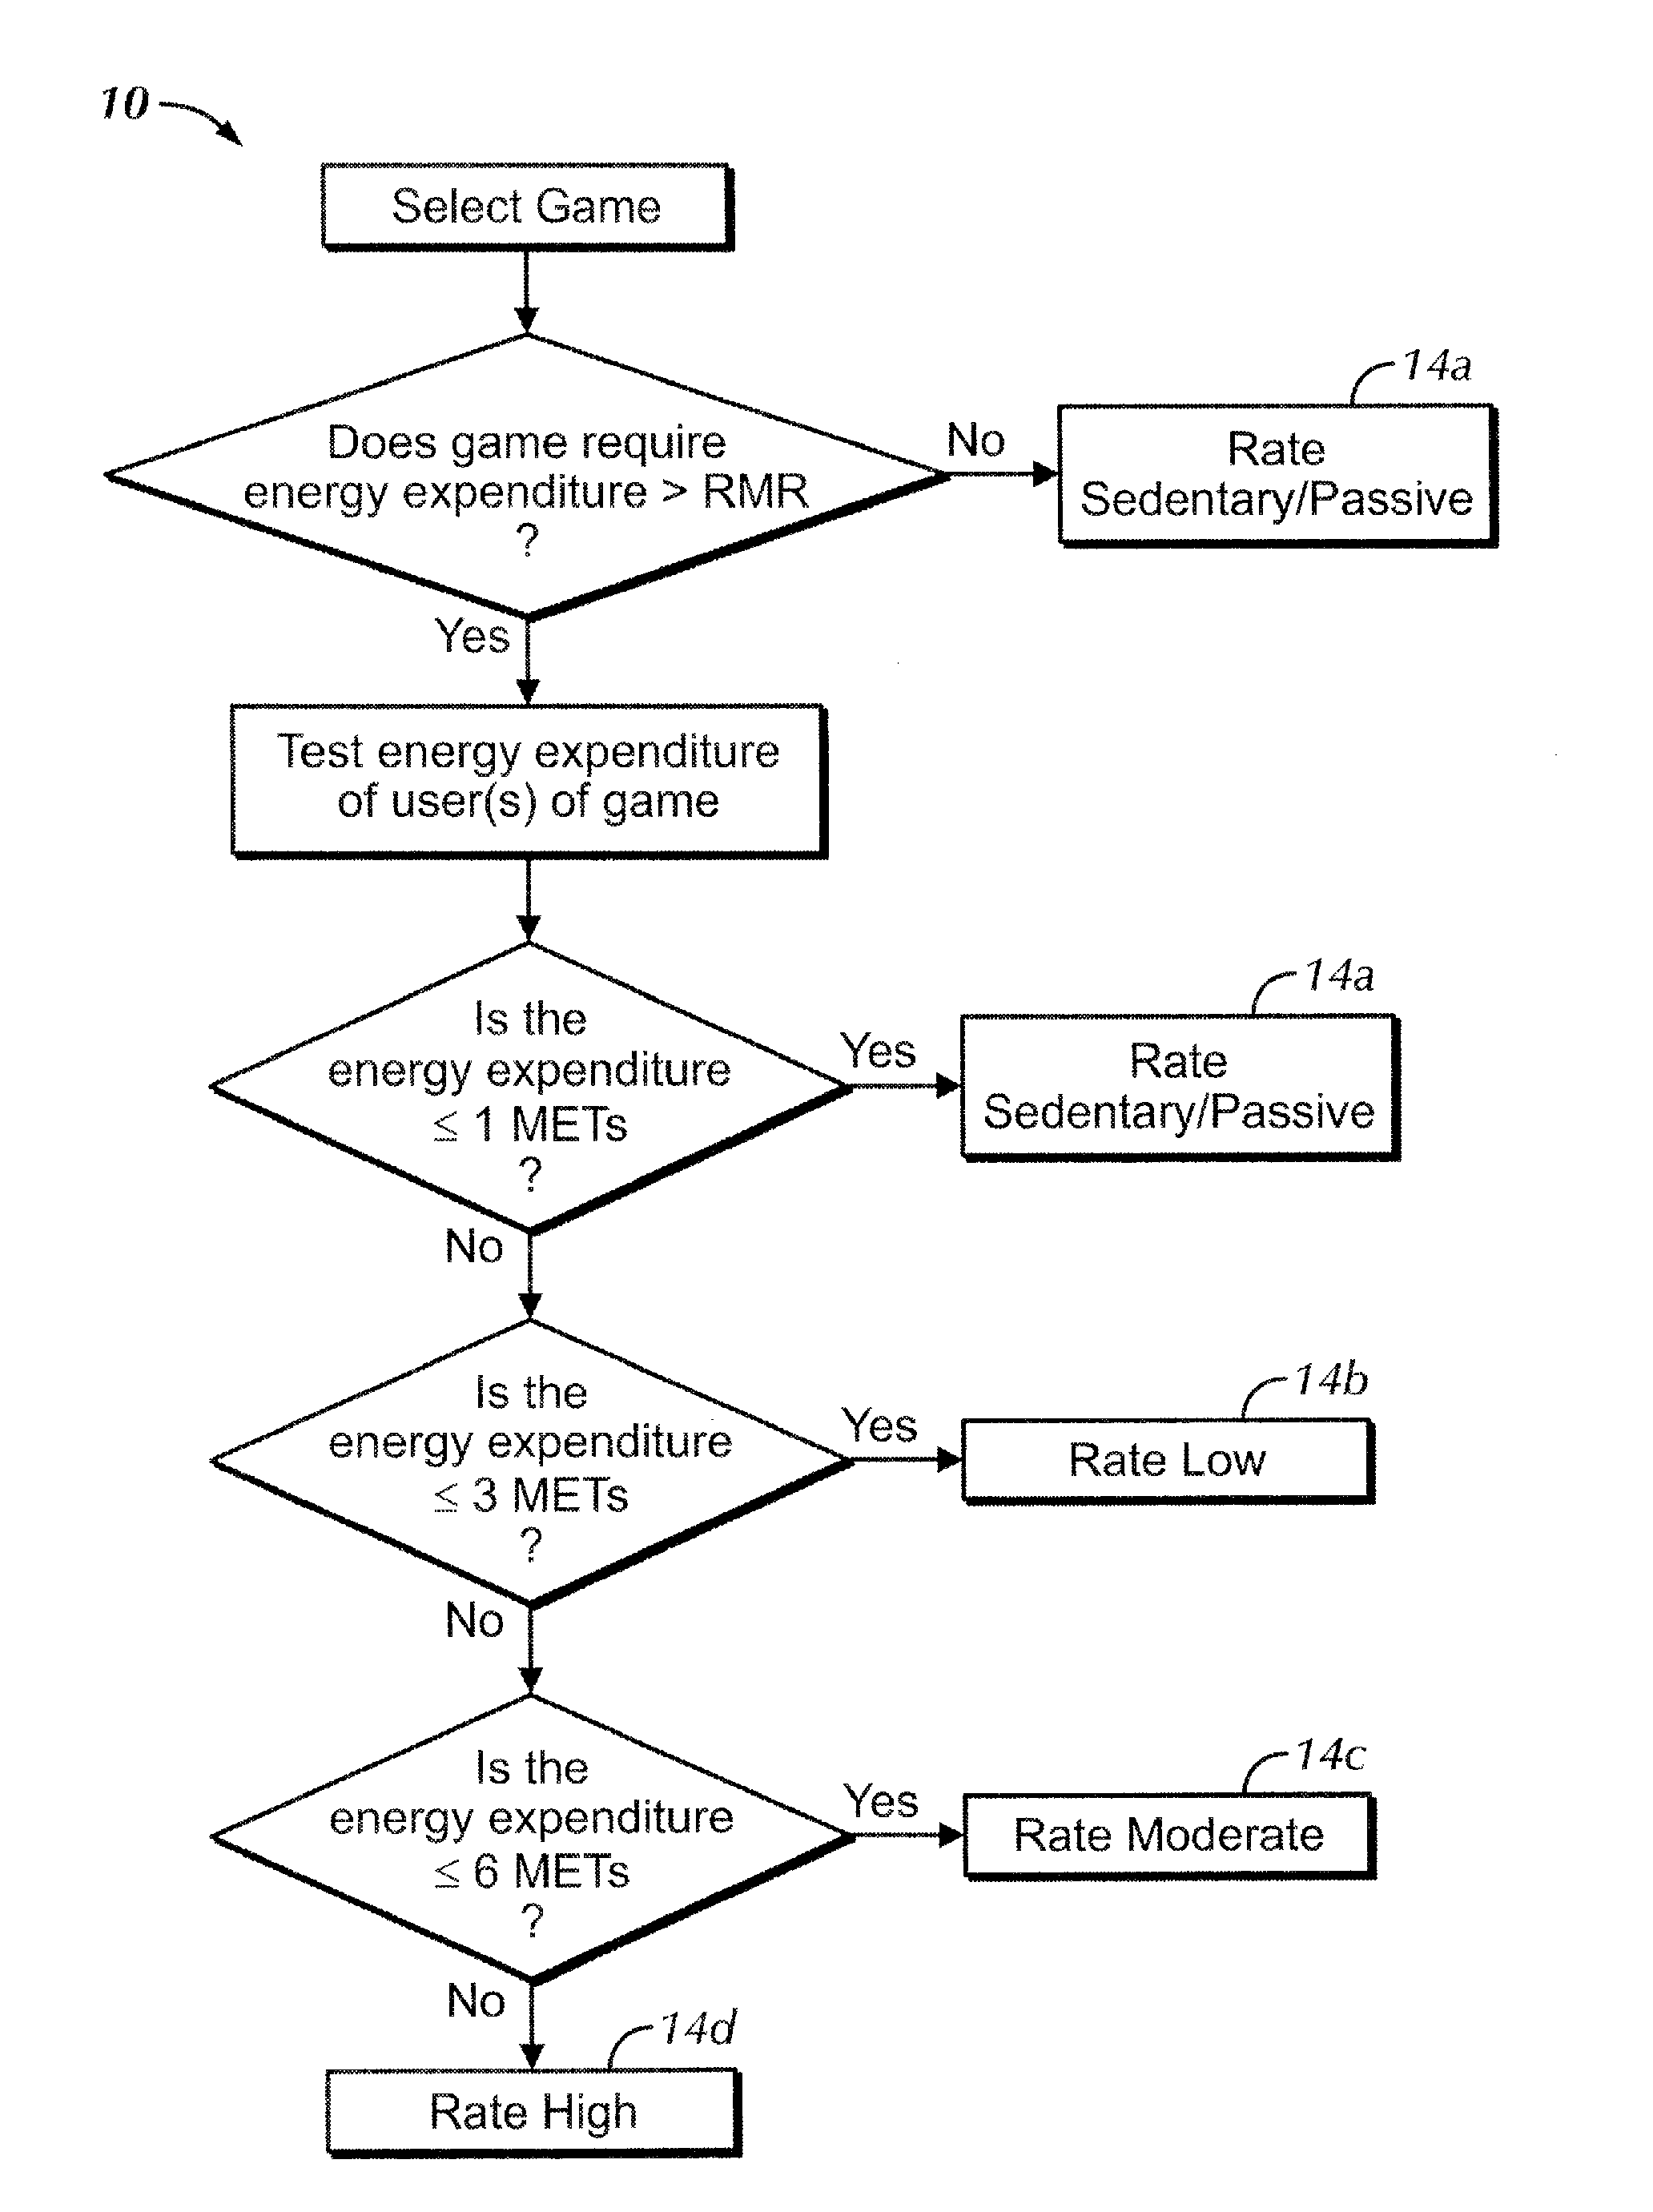 System and method for rating intensity of video games